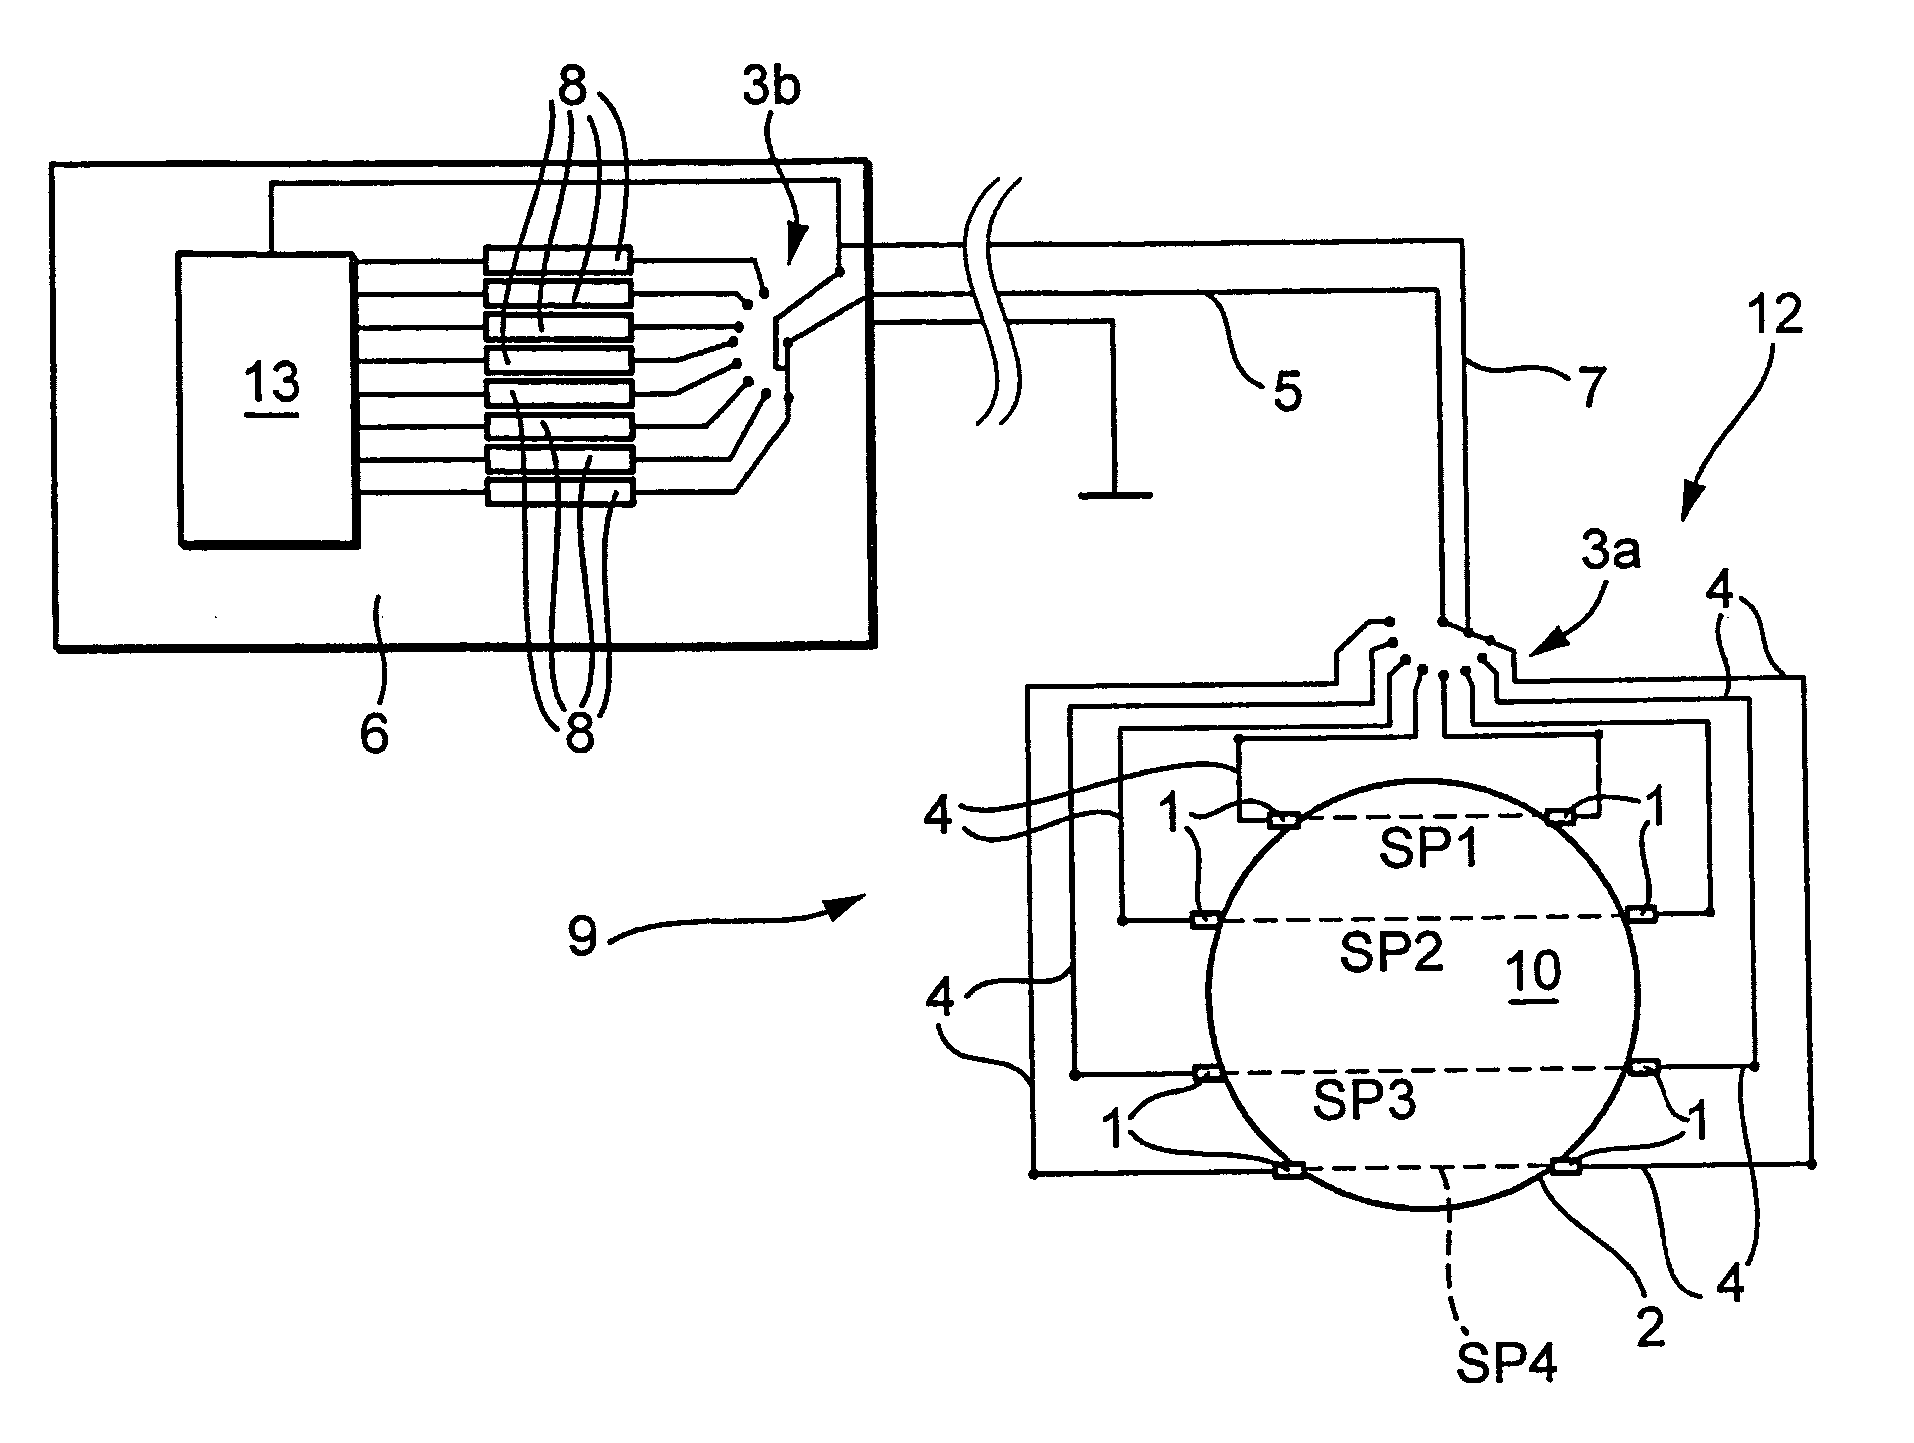 Apparatus for determining and/or monitoring volume and/or mass flow of a medium